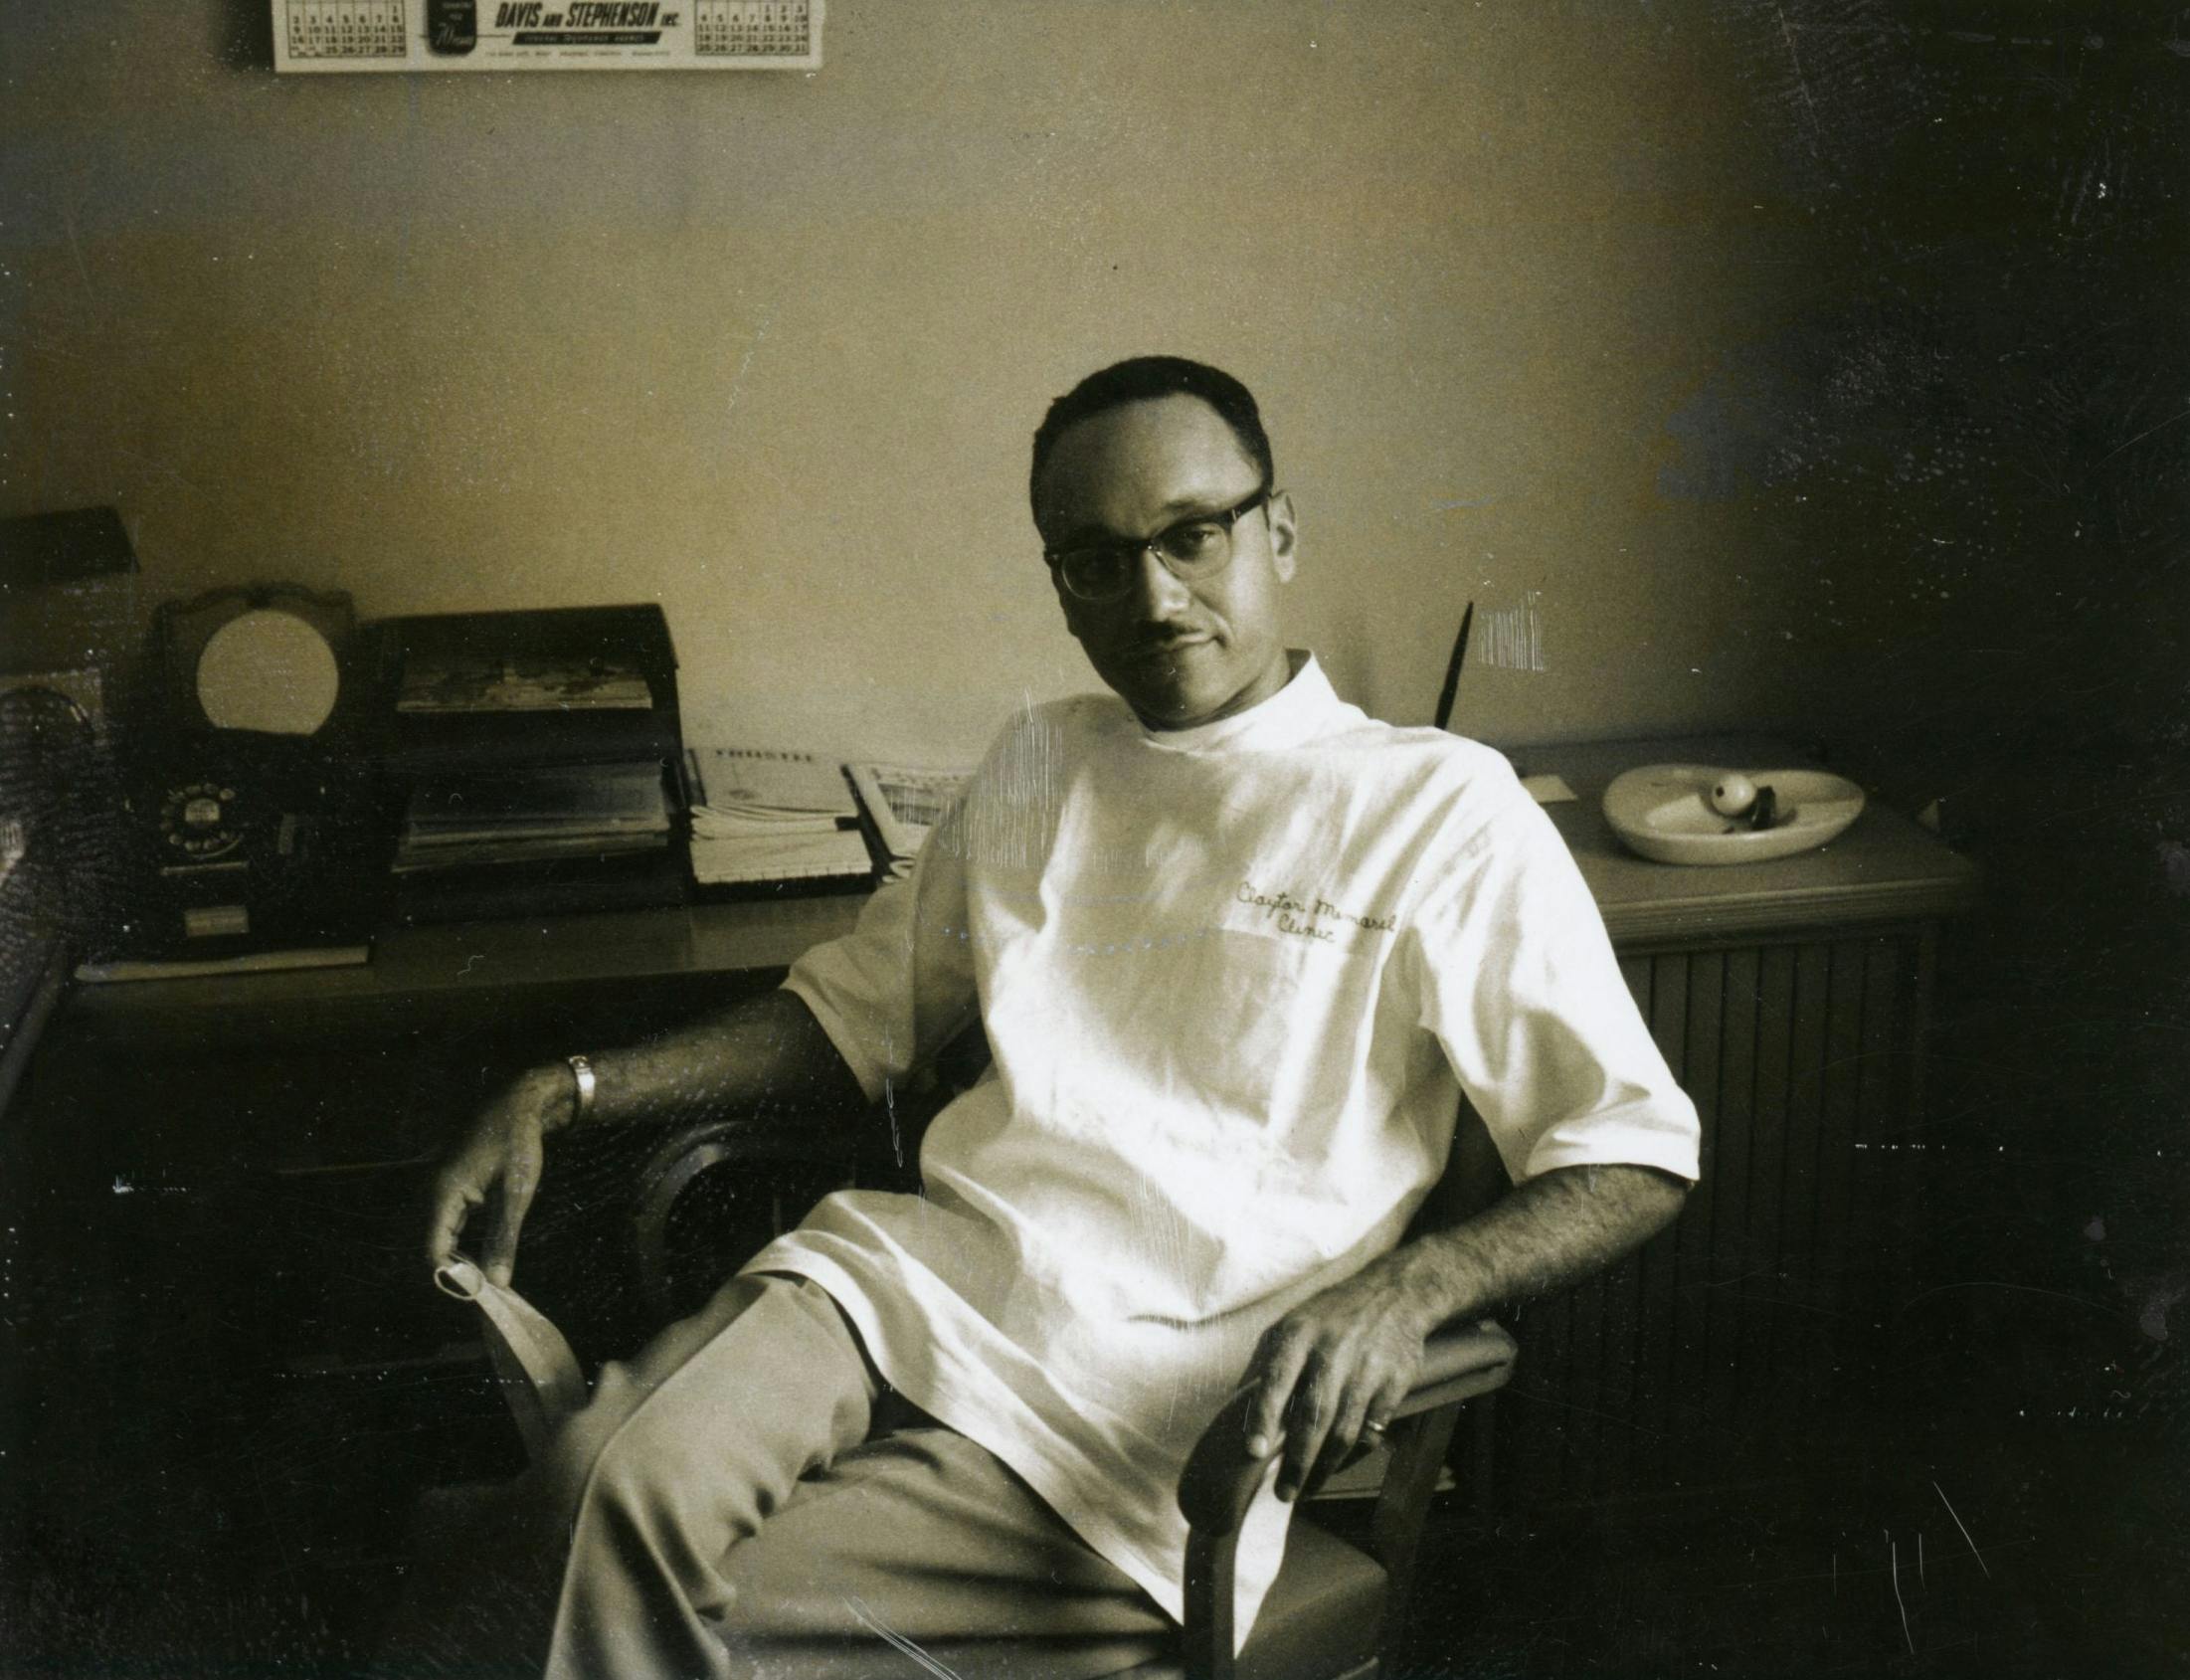 Dr. Claytor sitting happily in a chair at a desk